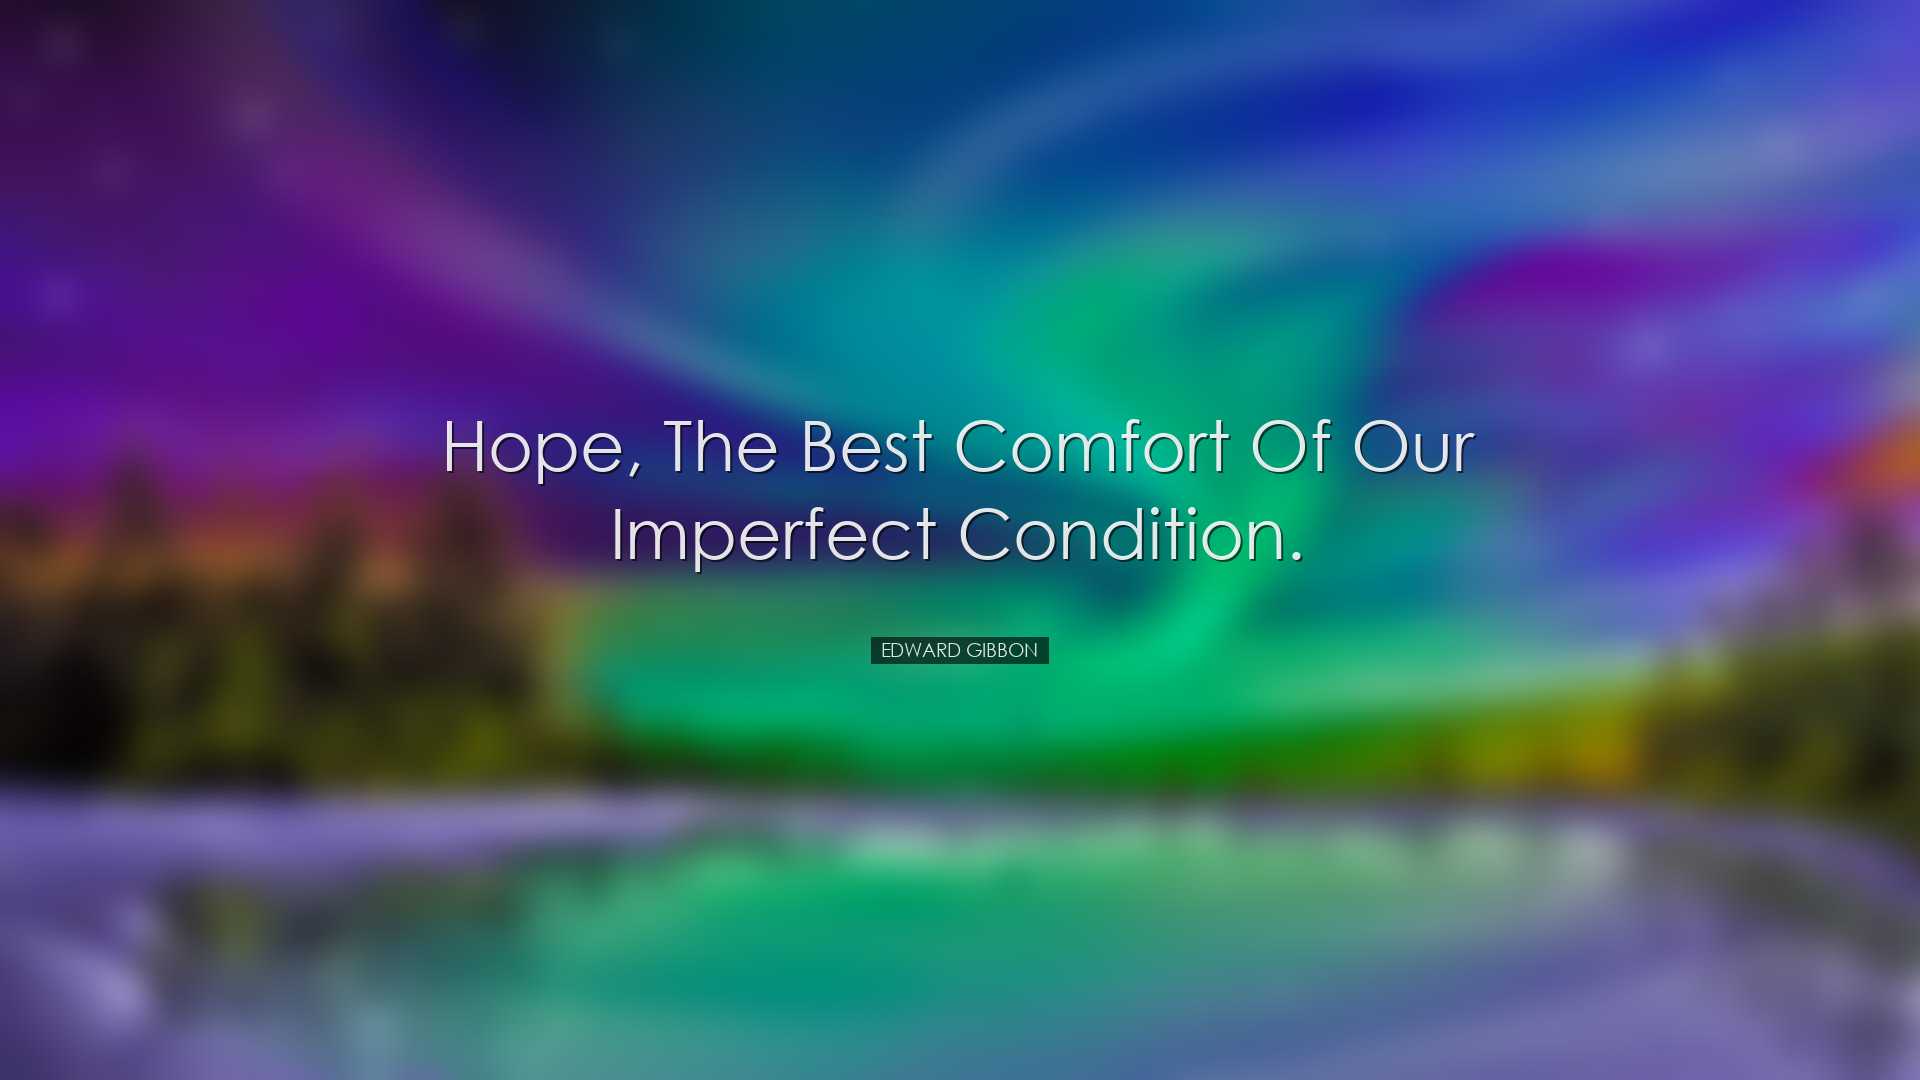 Hope, the best comfort of our imperfect condition. - Edward Gibbon